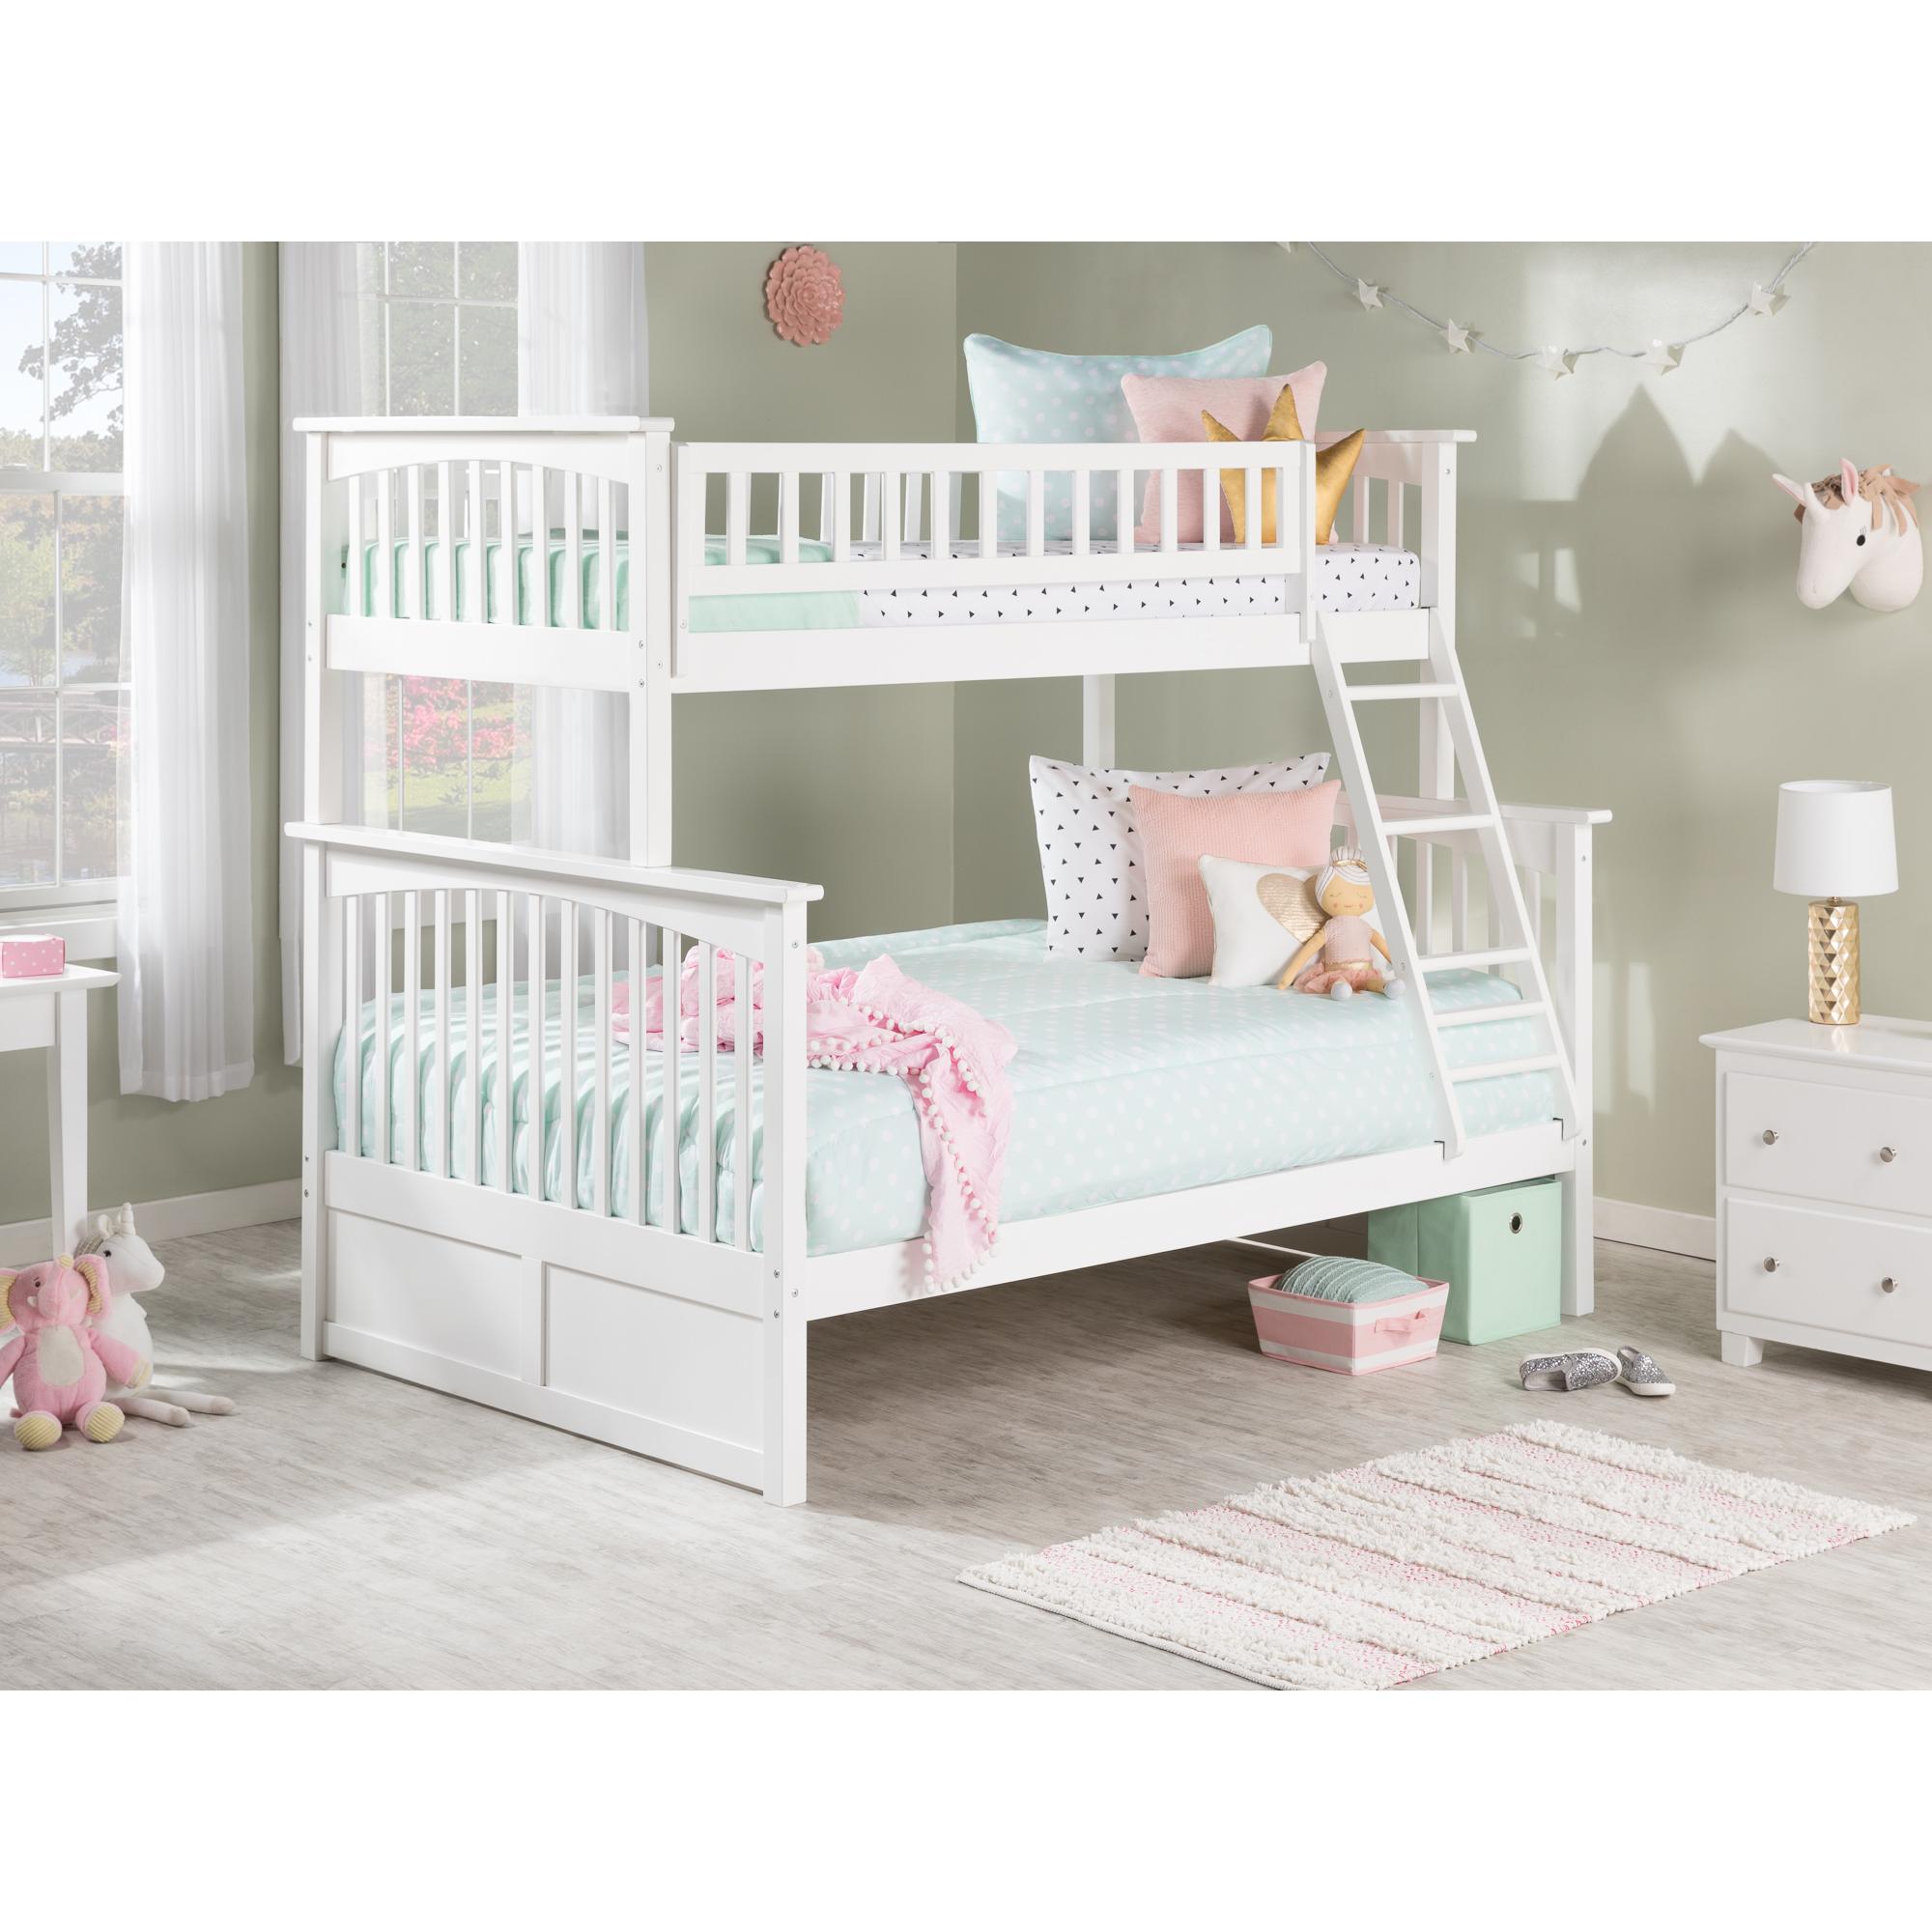 Columbia Bunk Bed Twin over Full in Multiple Colors and Configurations - image 1 of 5